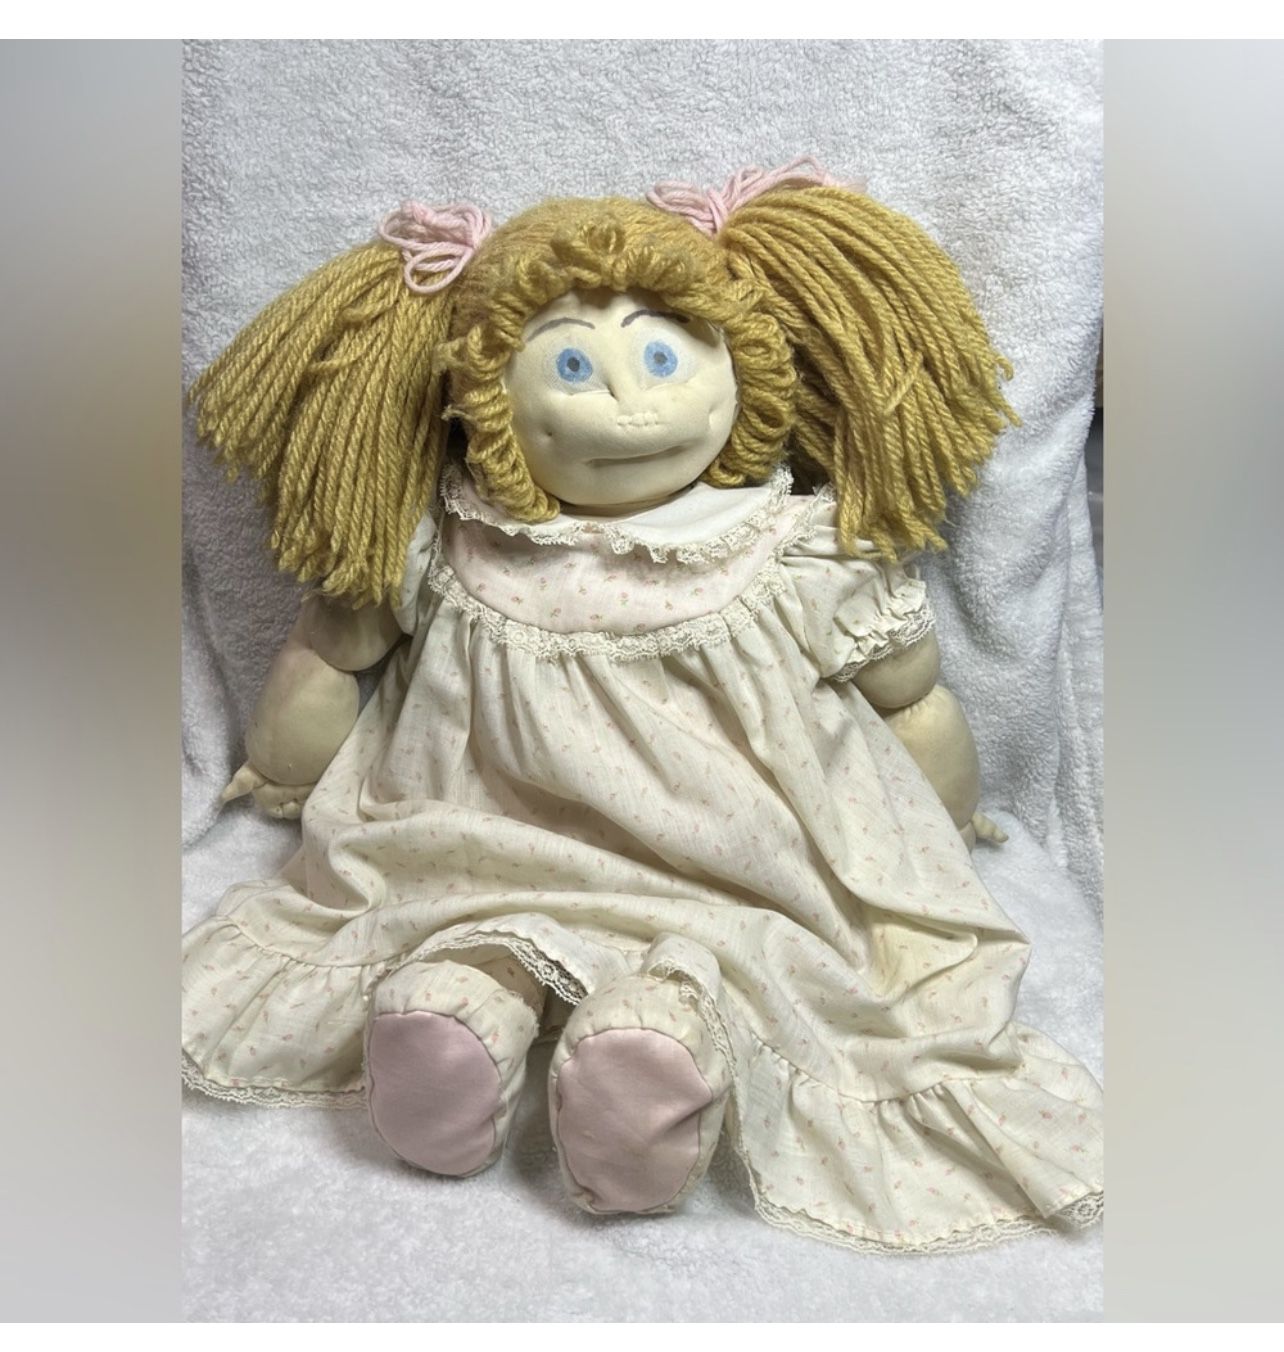 1980 Handmade Cabbage Patch Kids Style Doll